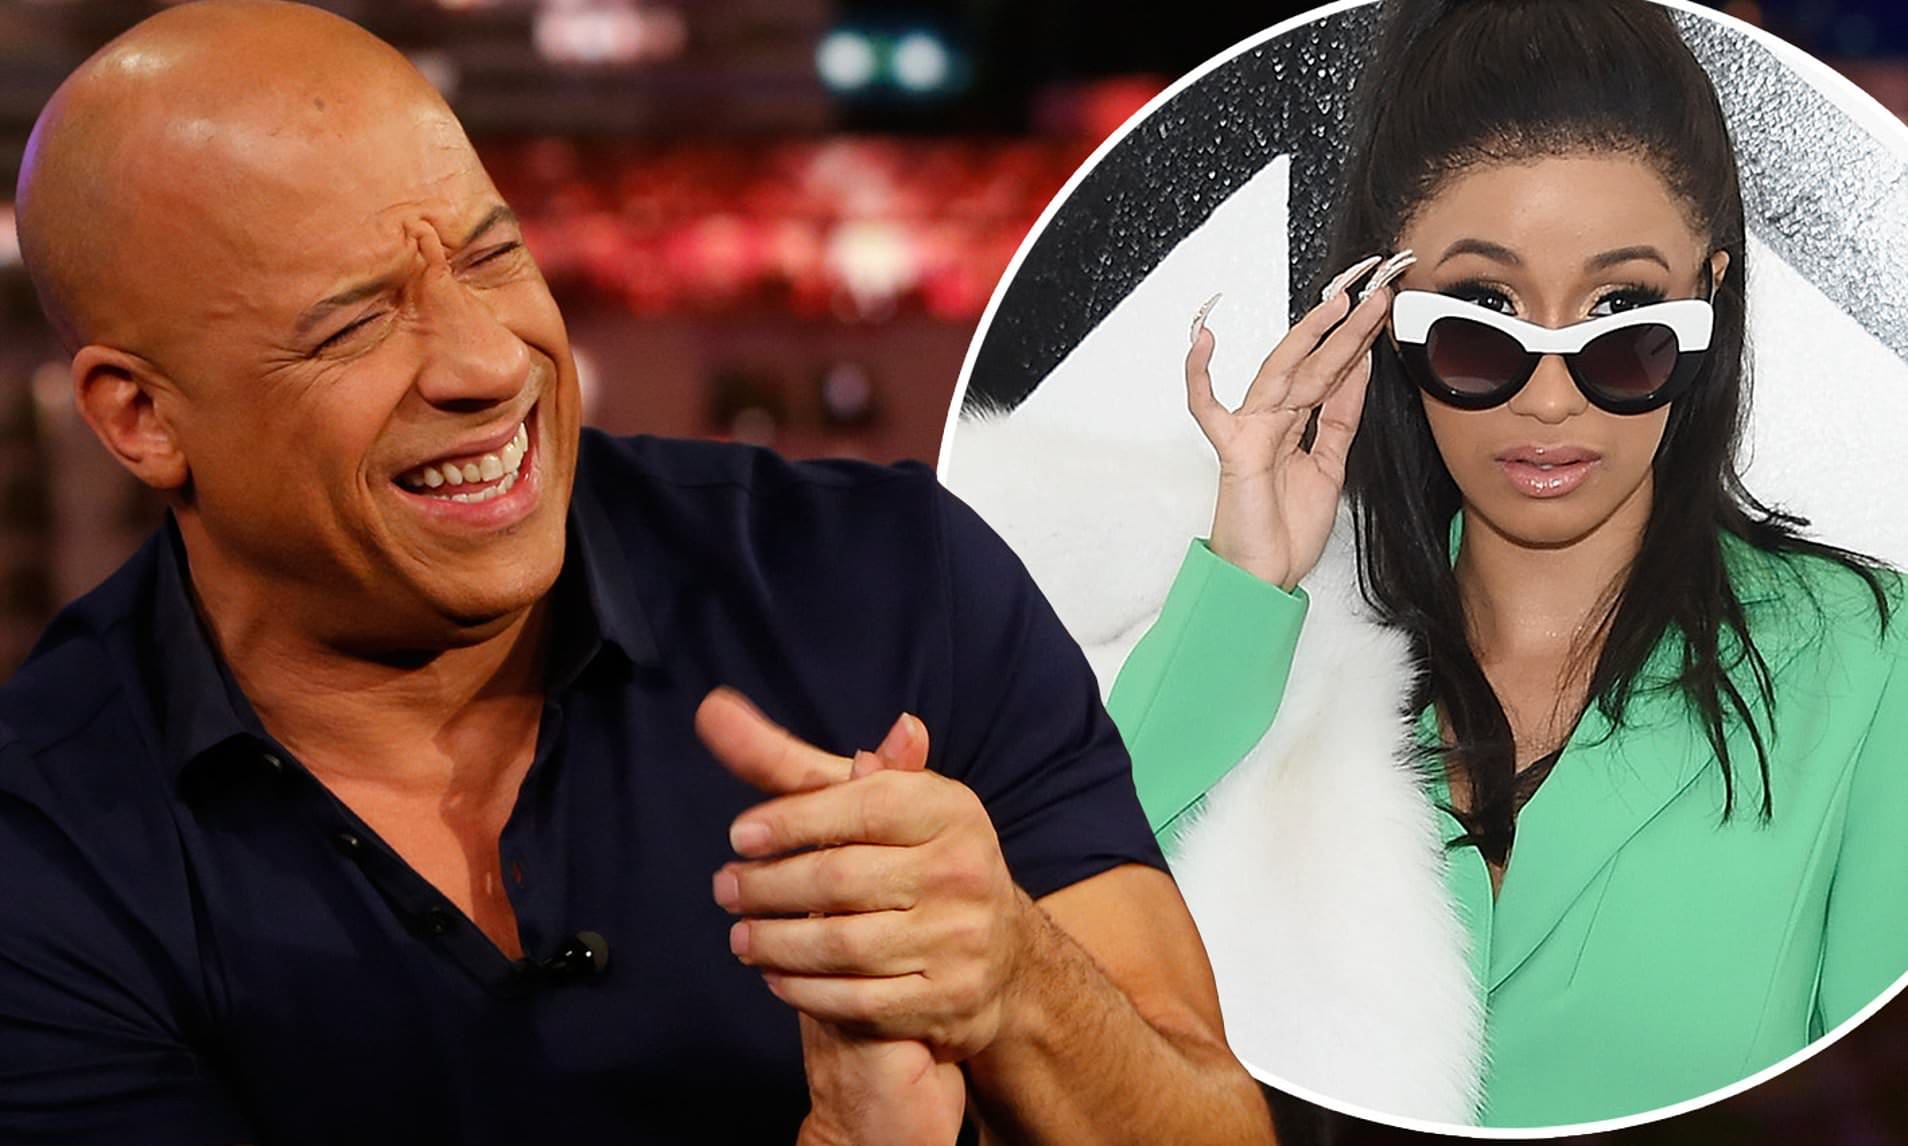 ”vin-diesel-drops-important-news-about-cardi-b-see-the-video”